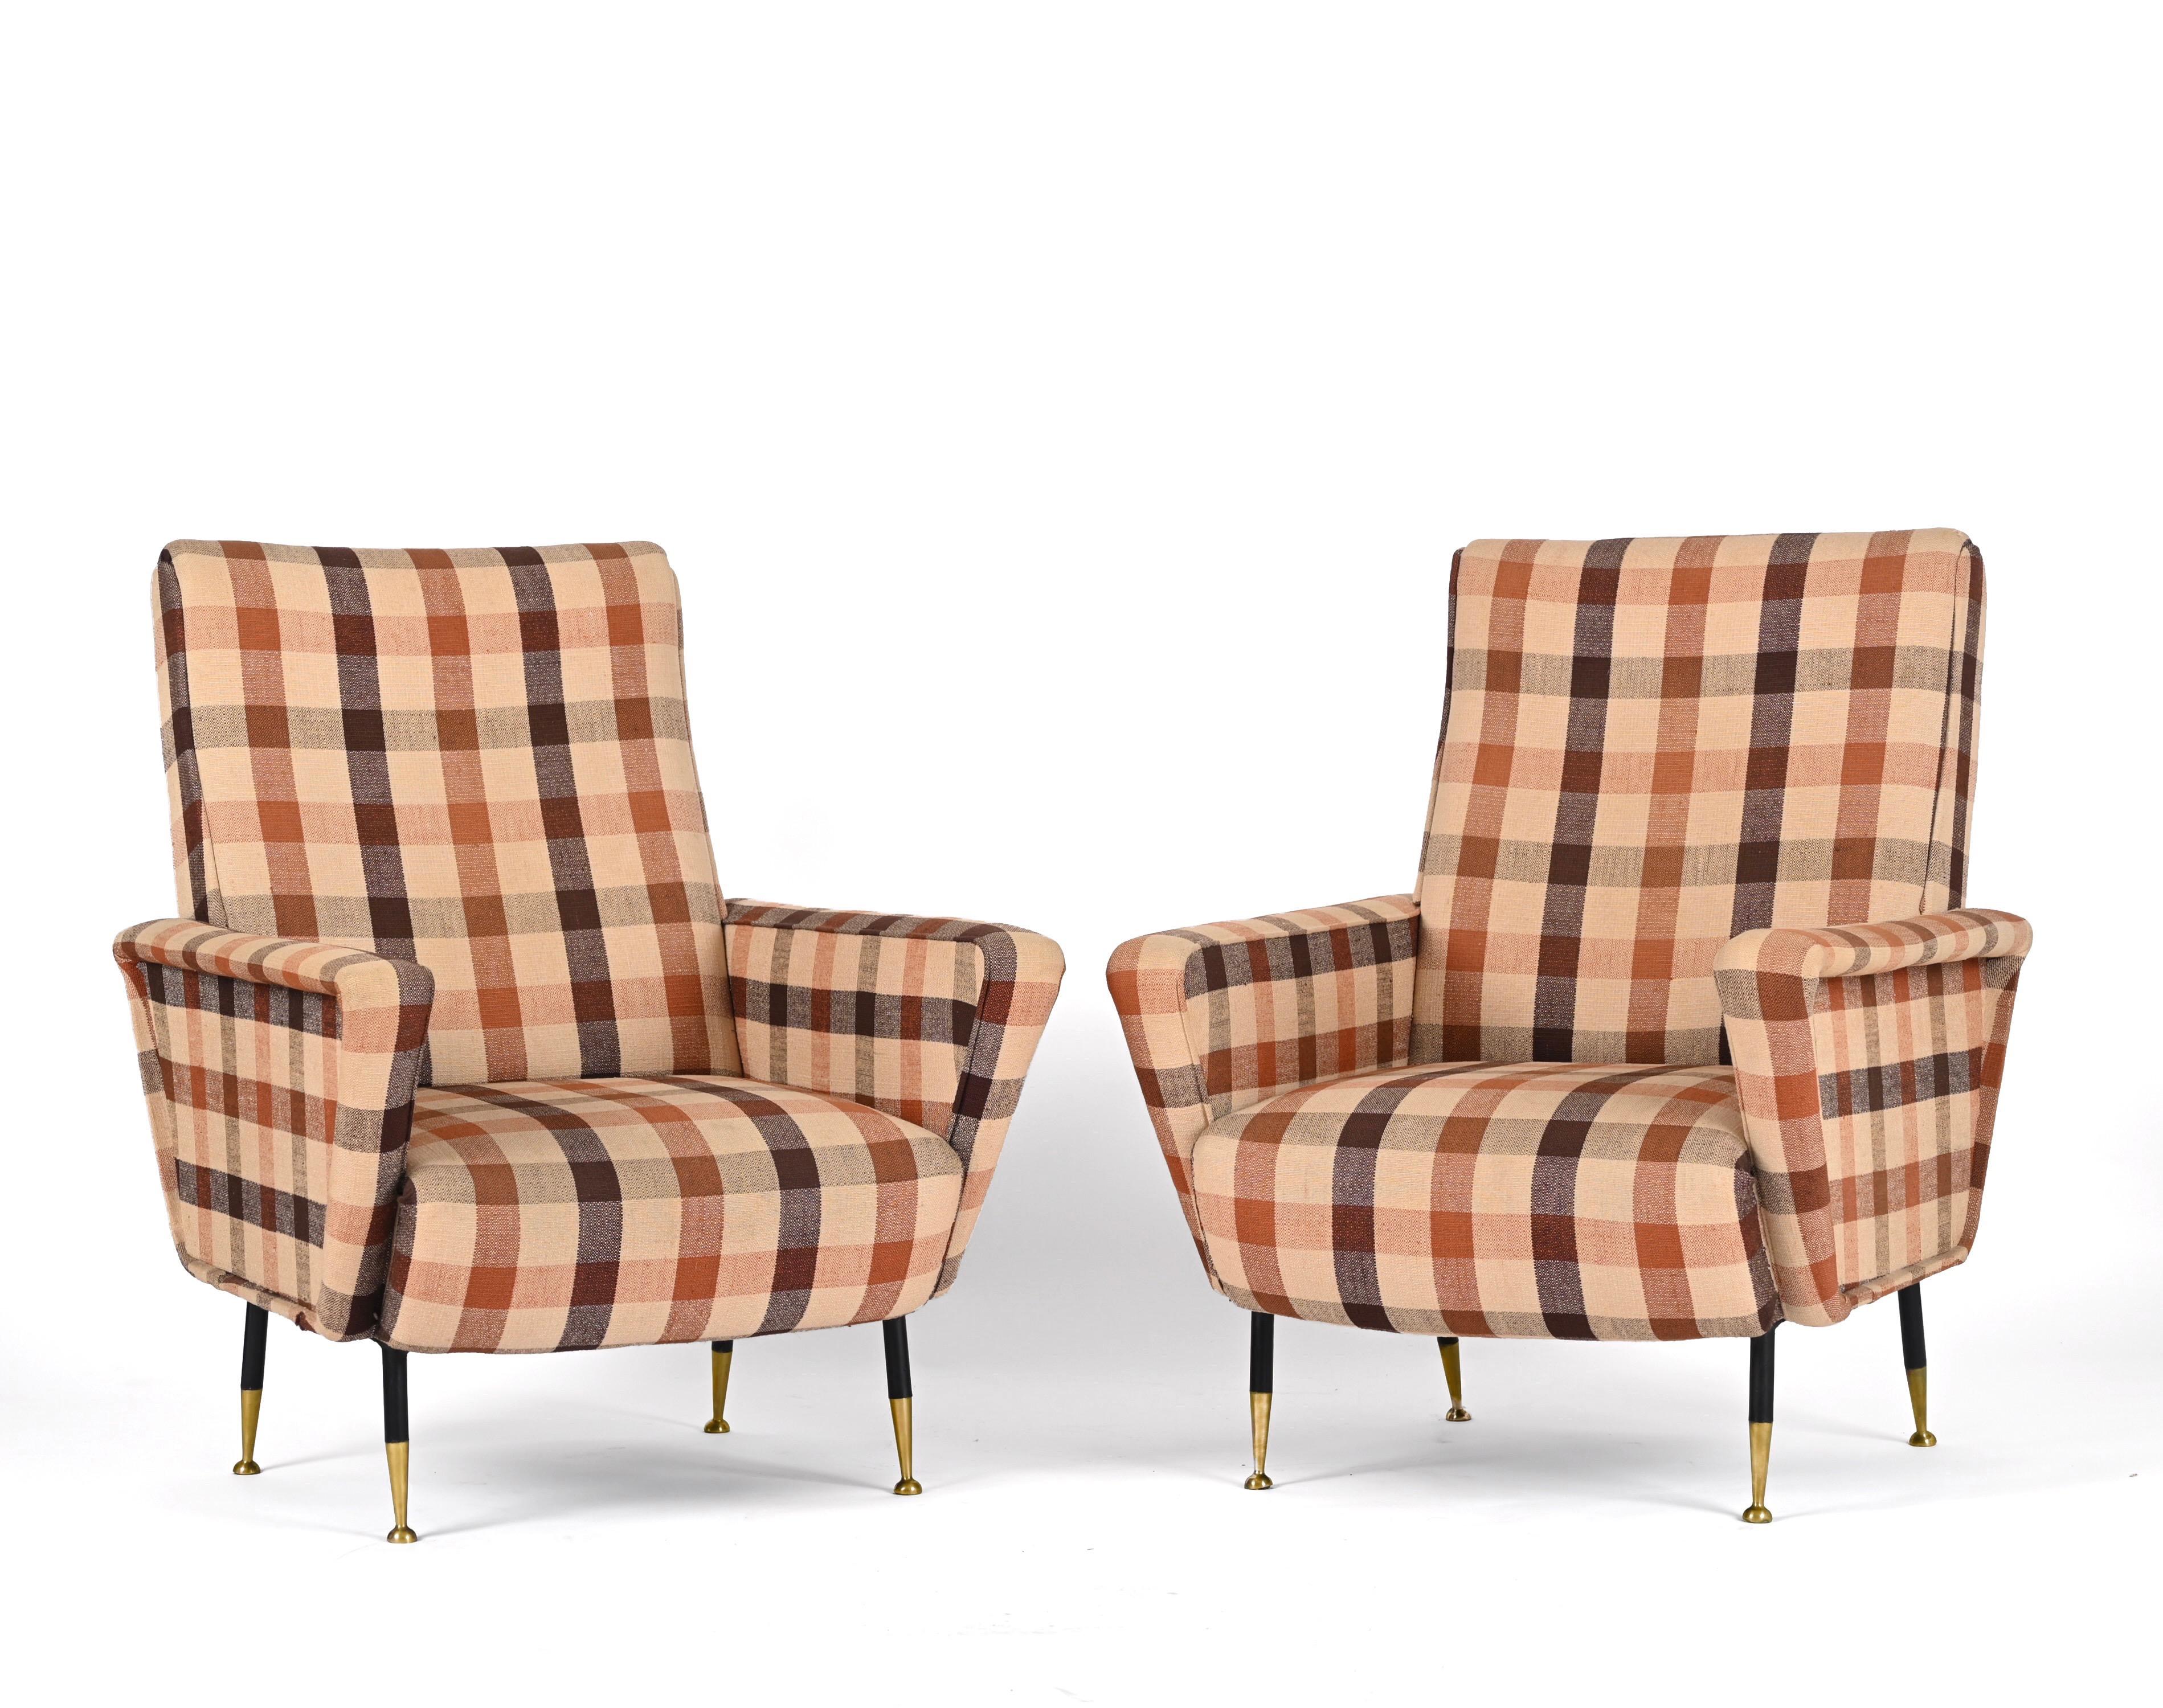 Marco Zanuso Pair of Armchairs, Check Fabric, Brass and Metal, Italy 1950s For Sale 4